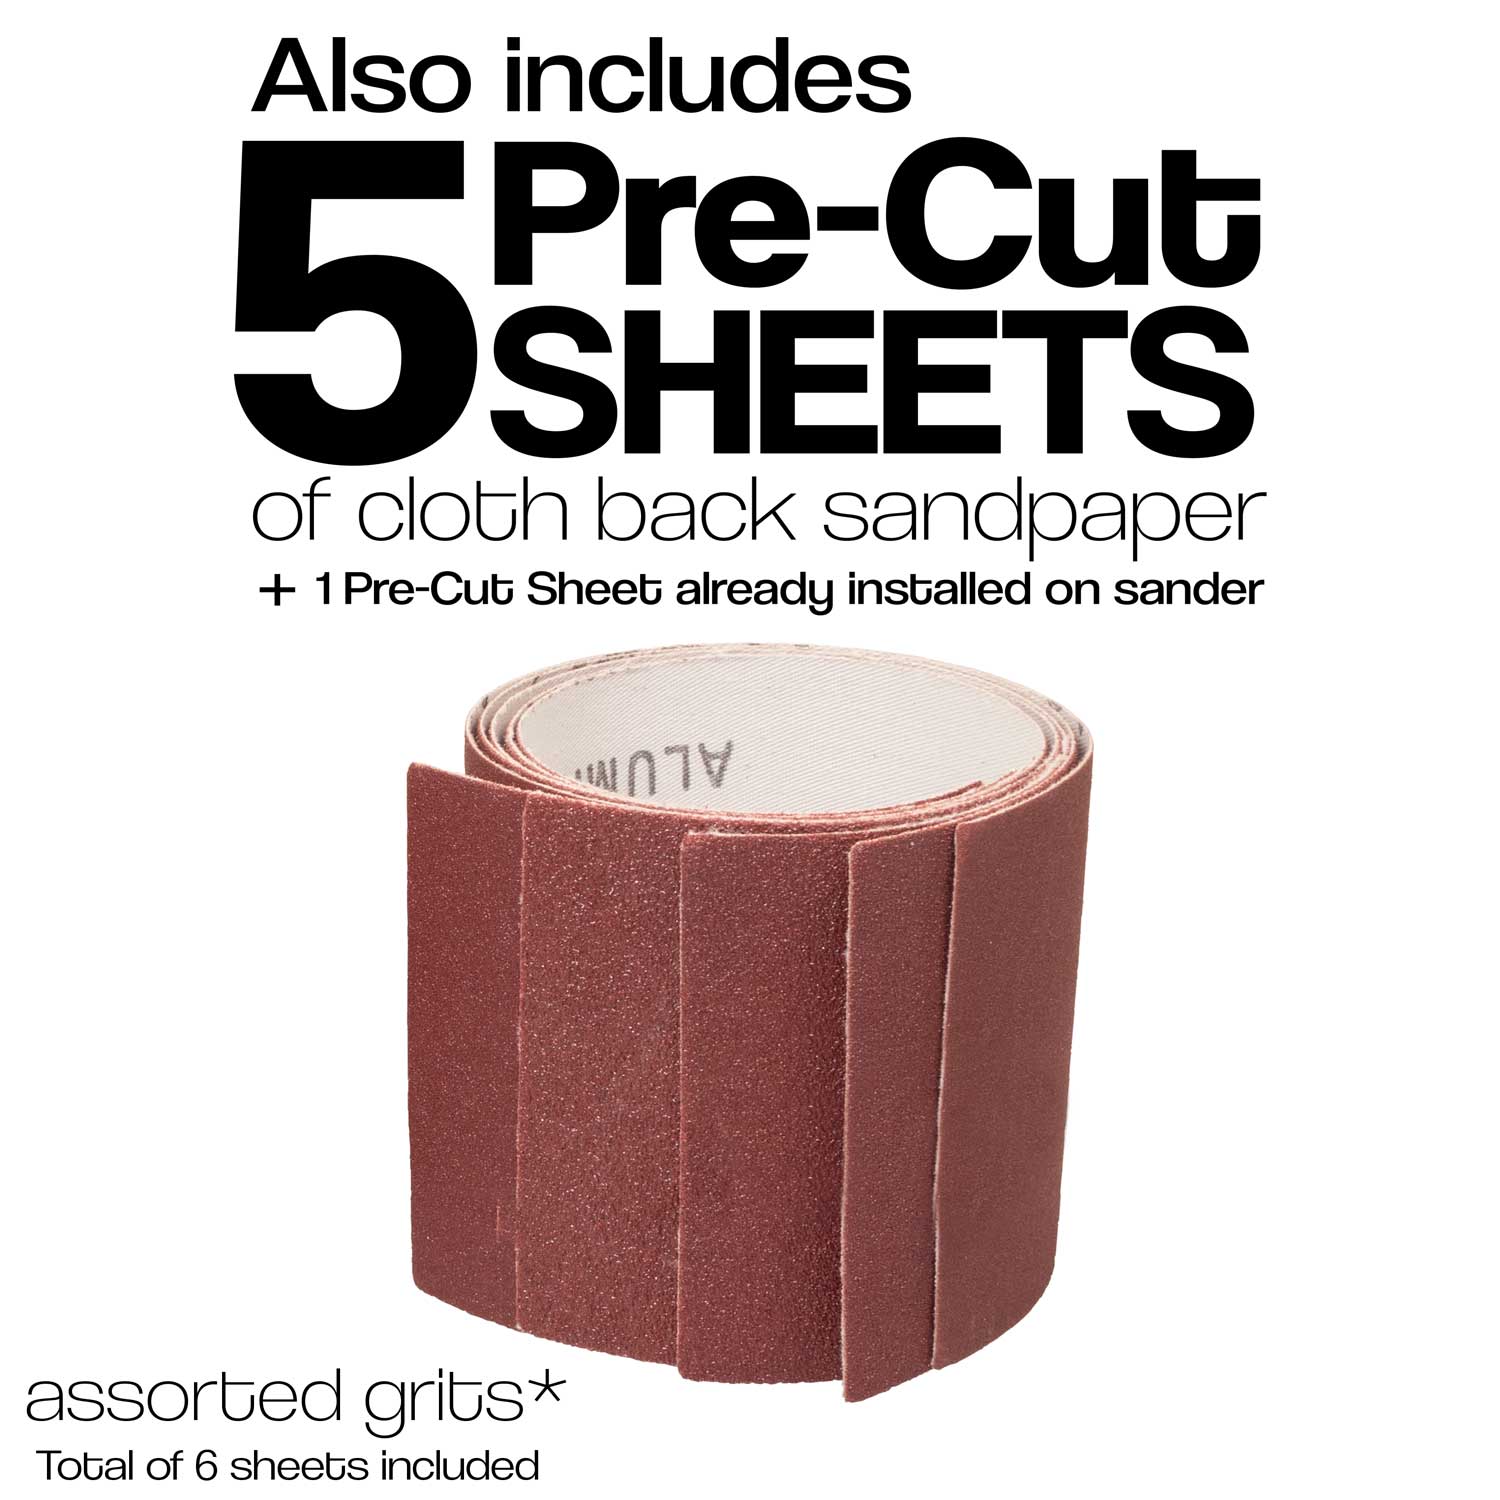 3" x 3" Sleeveless Sanding Drum with 6 Sheets of Assorted Grit Sandpaper